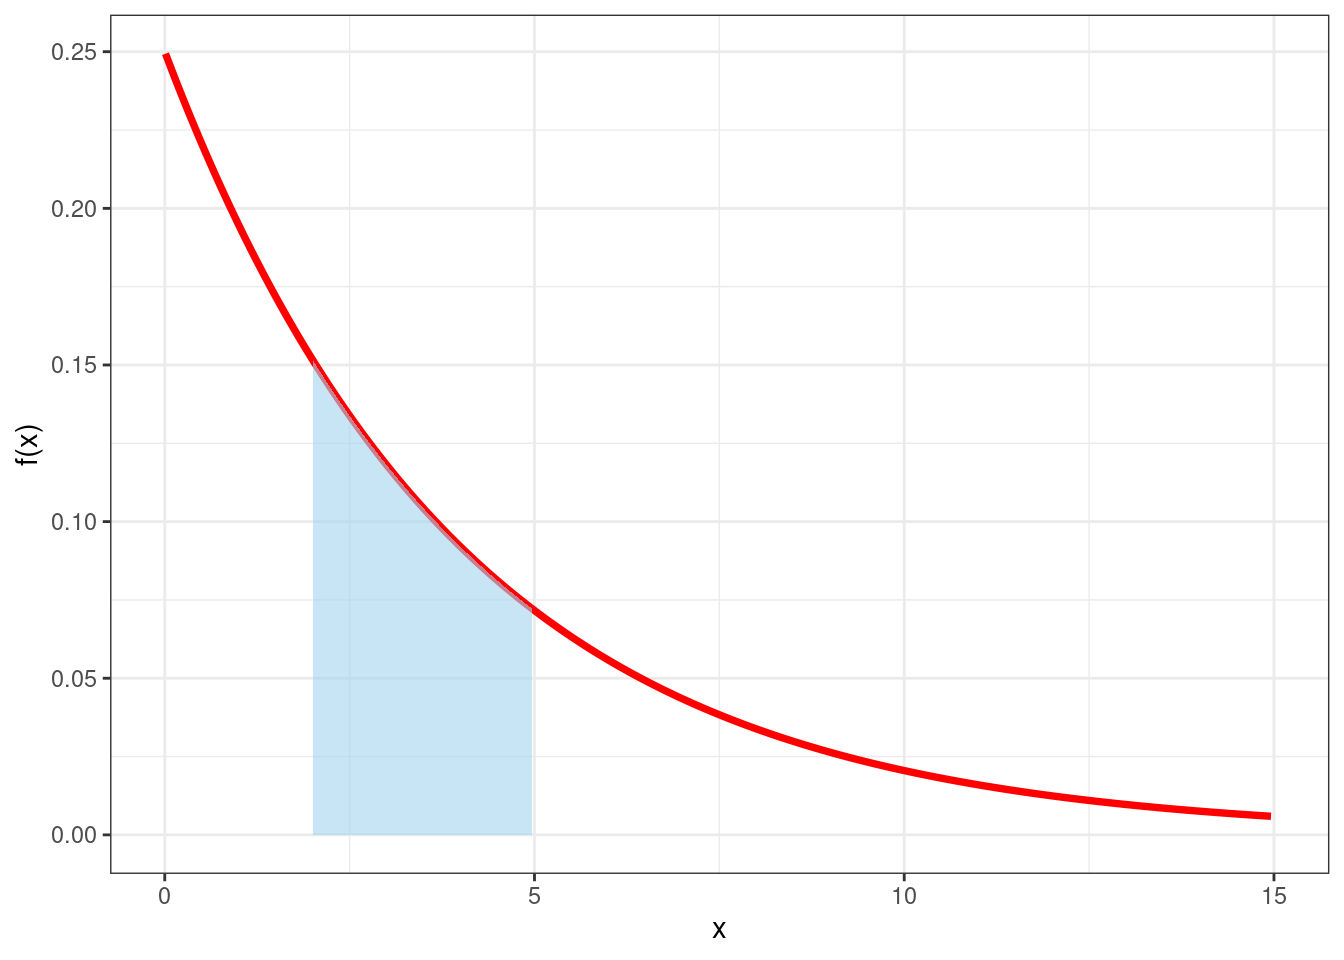 Probability density function for the waiting time in the donut shop example